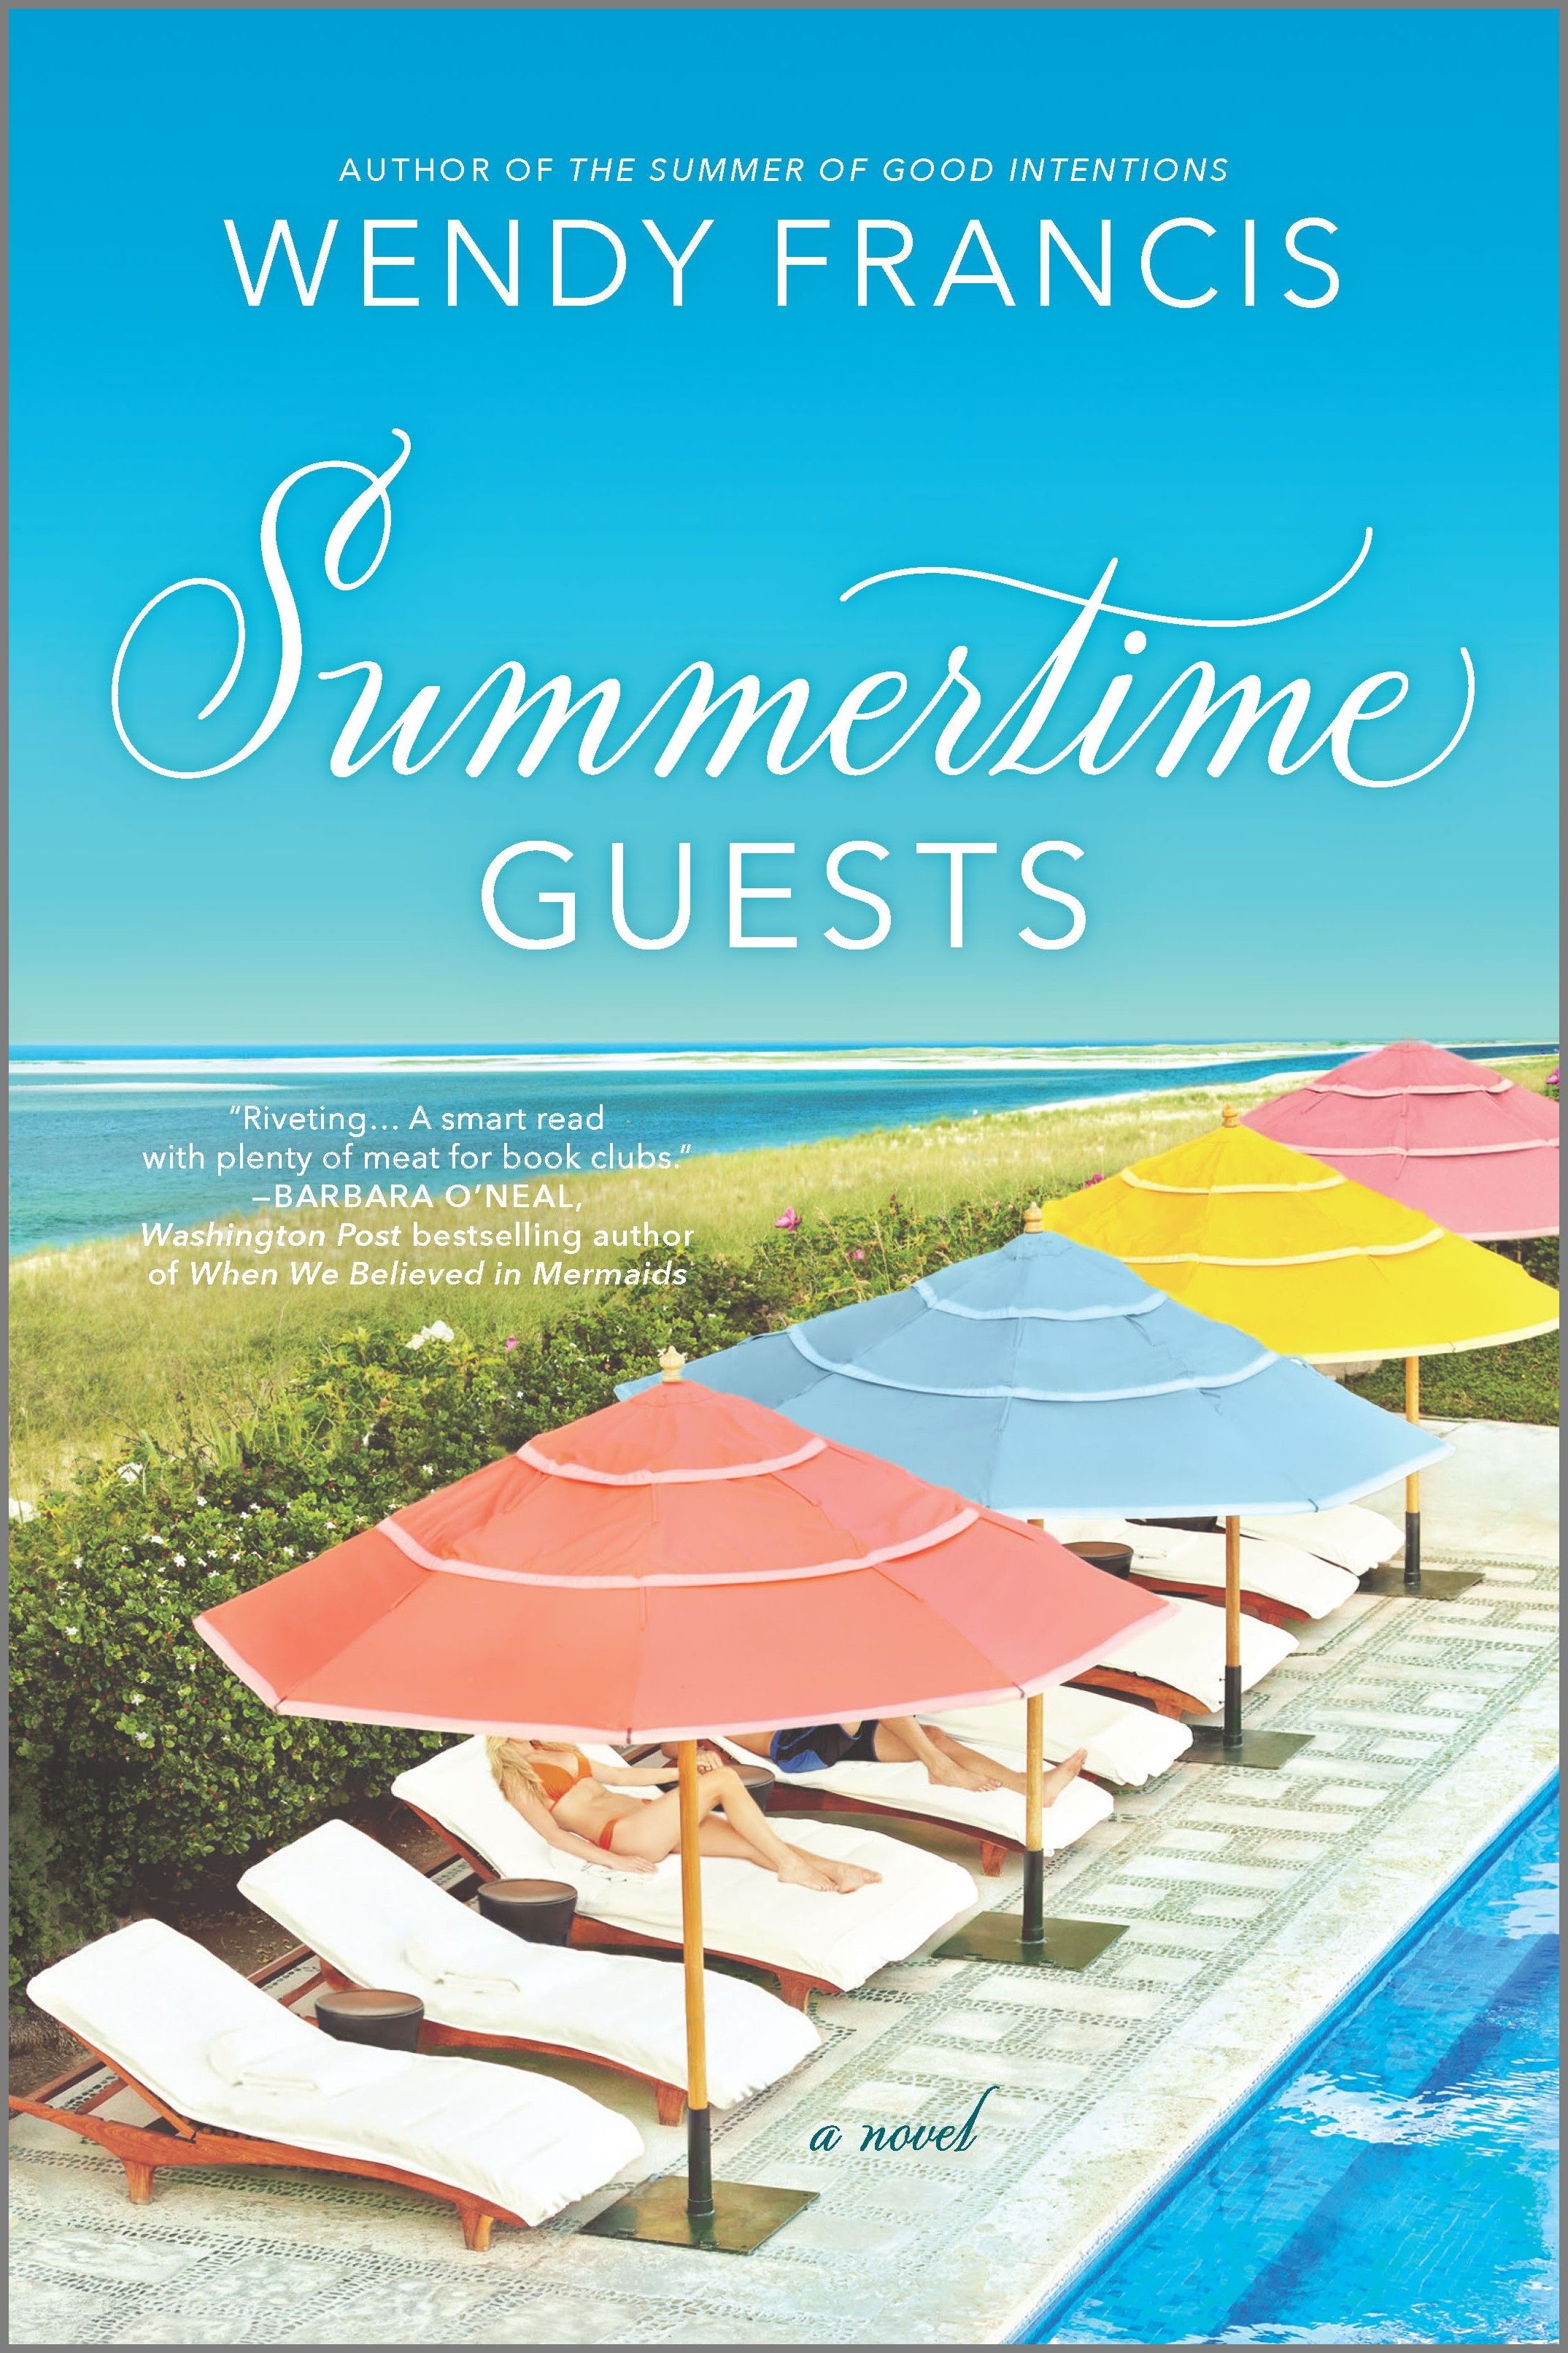 Summertime Guests by Wendy Francis